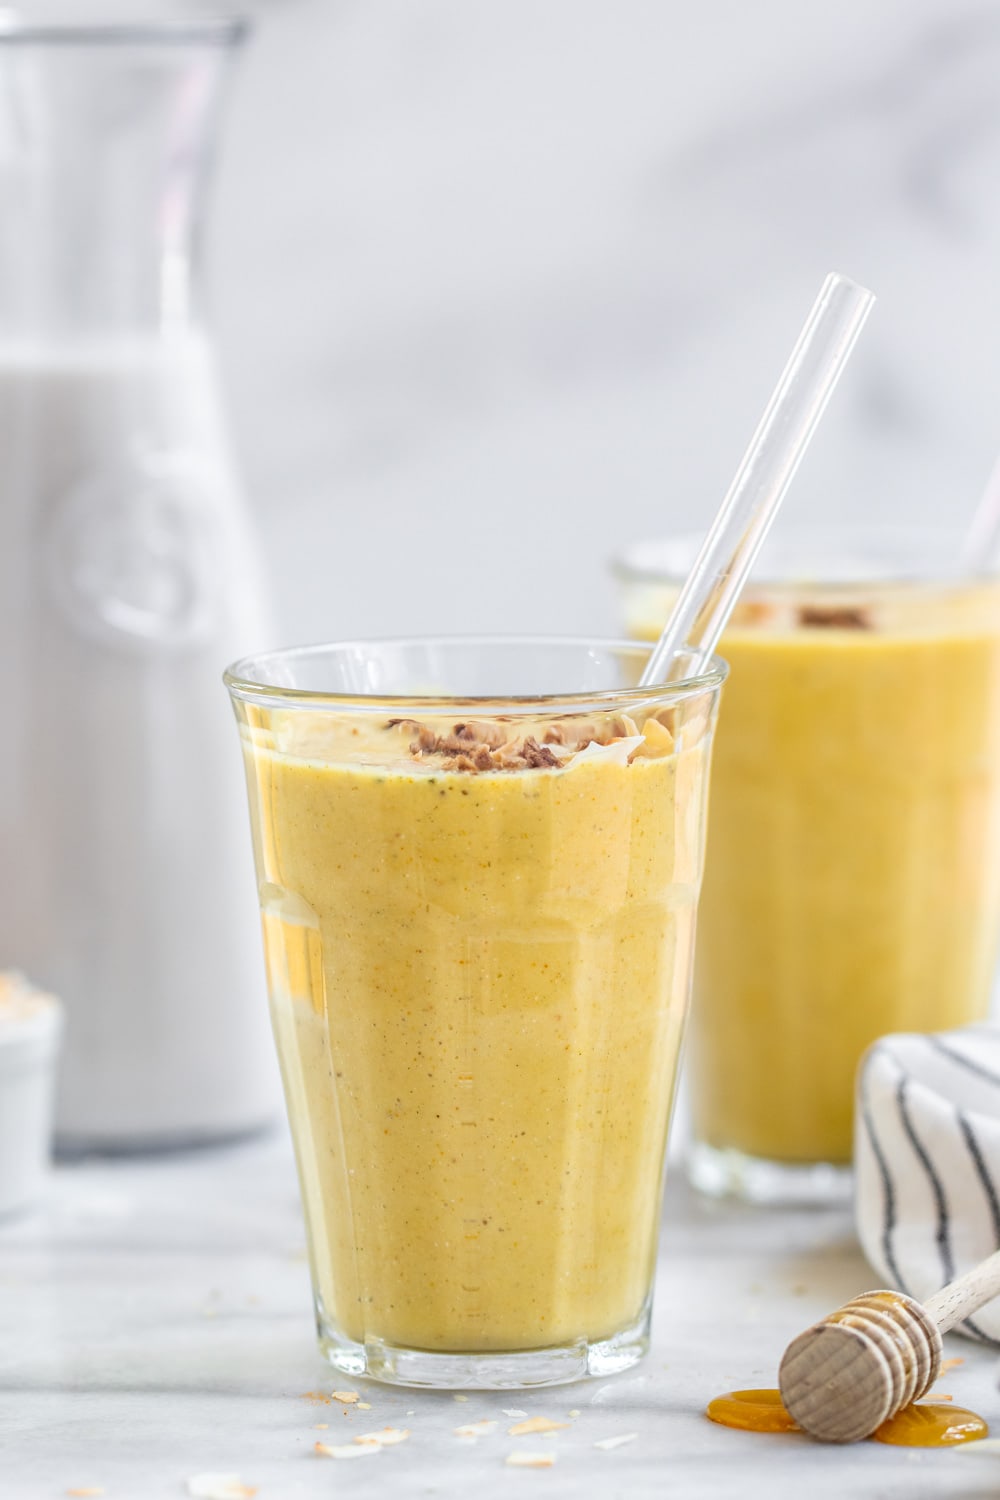 Golden milk smoothie in a glass cup with a straw.